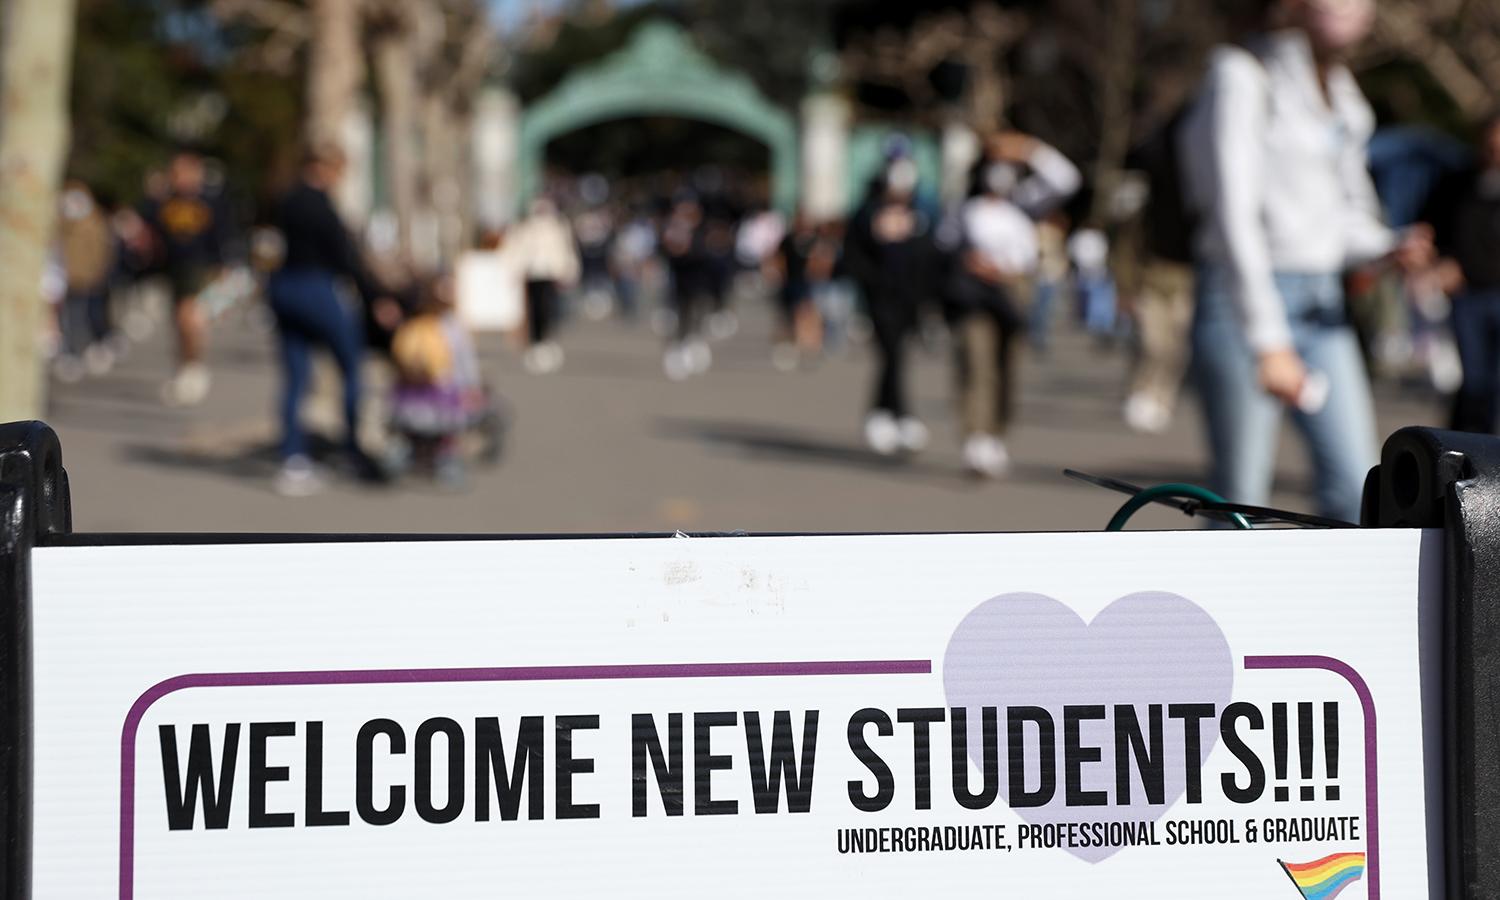 A sign welcomes new students to college campus.